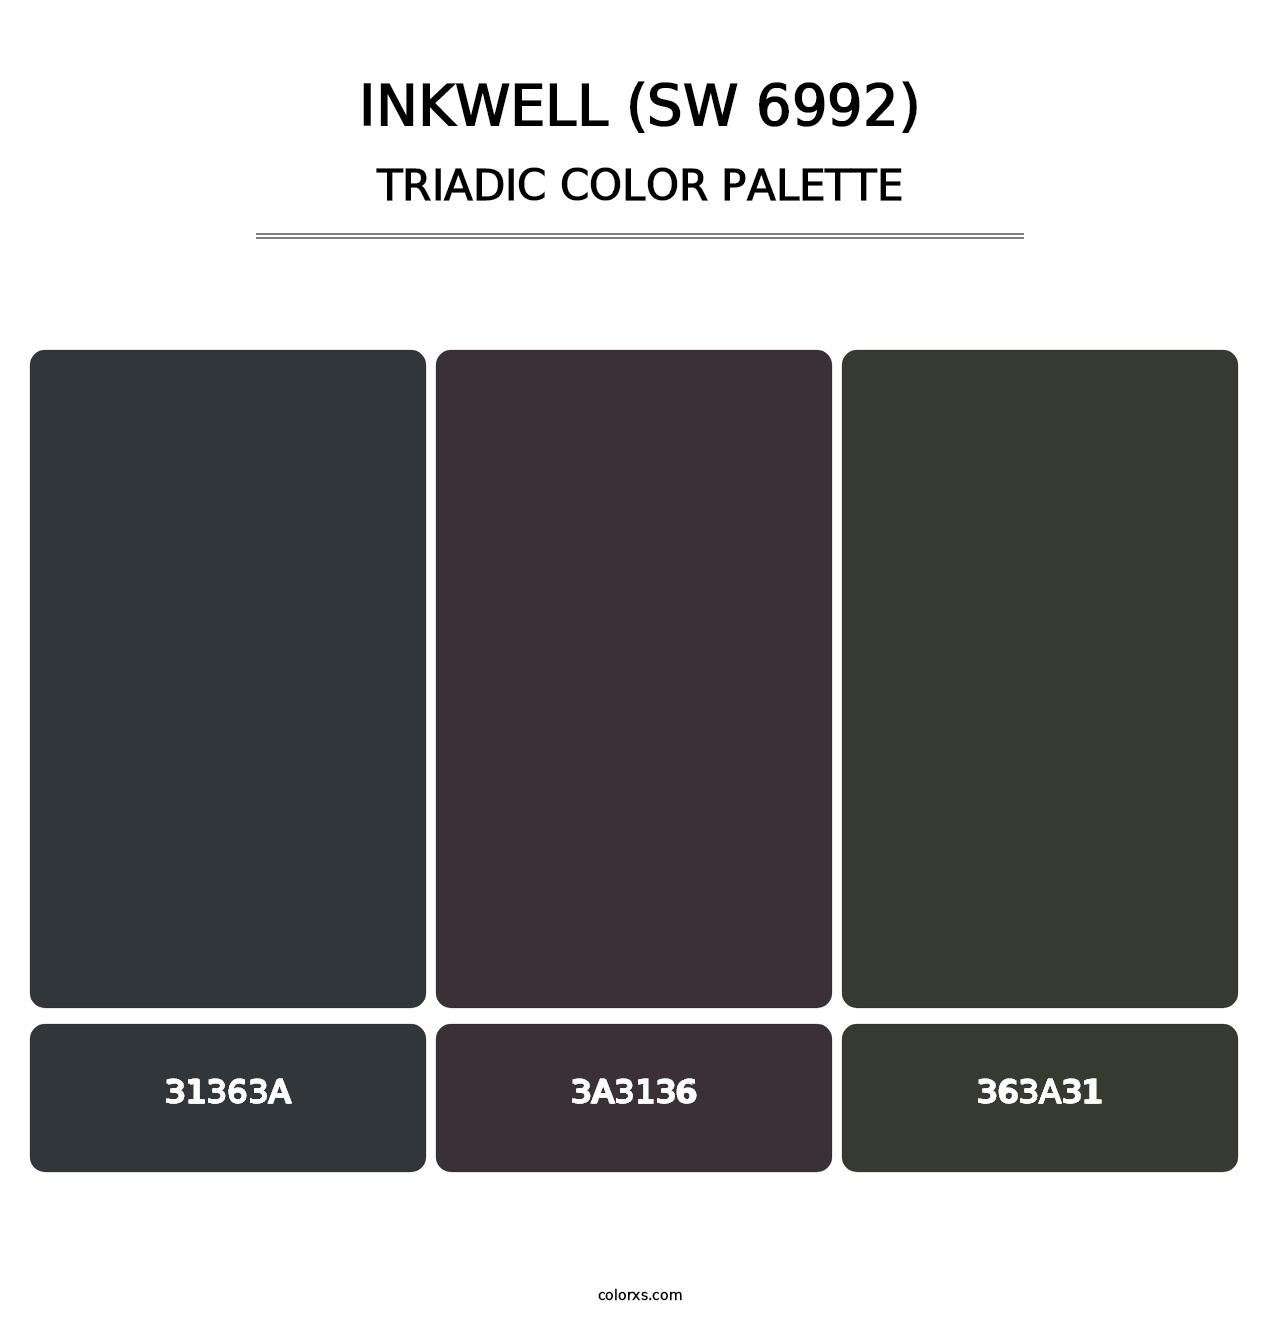 Inkwell (SW 6992) - Triadic Color Palette